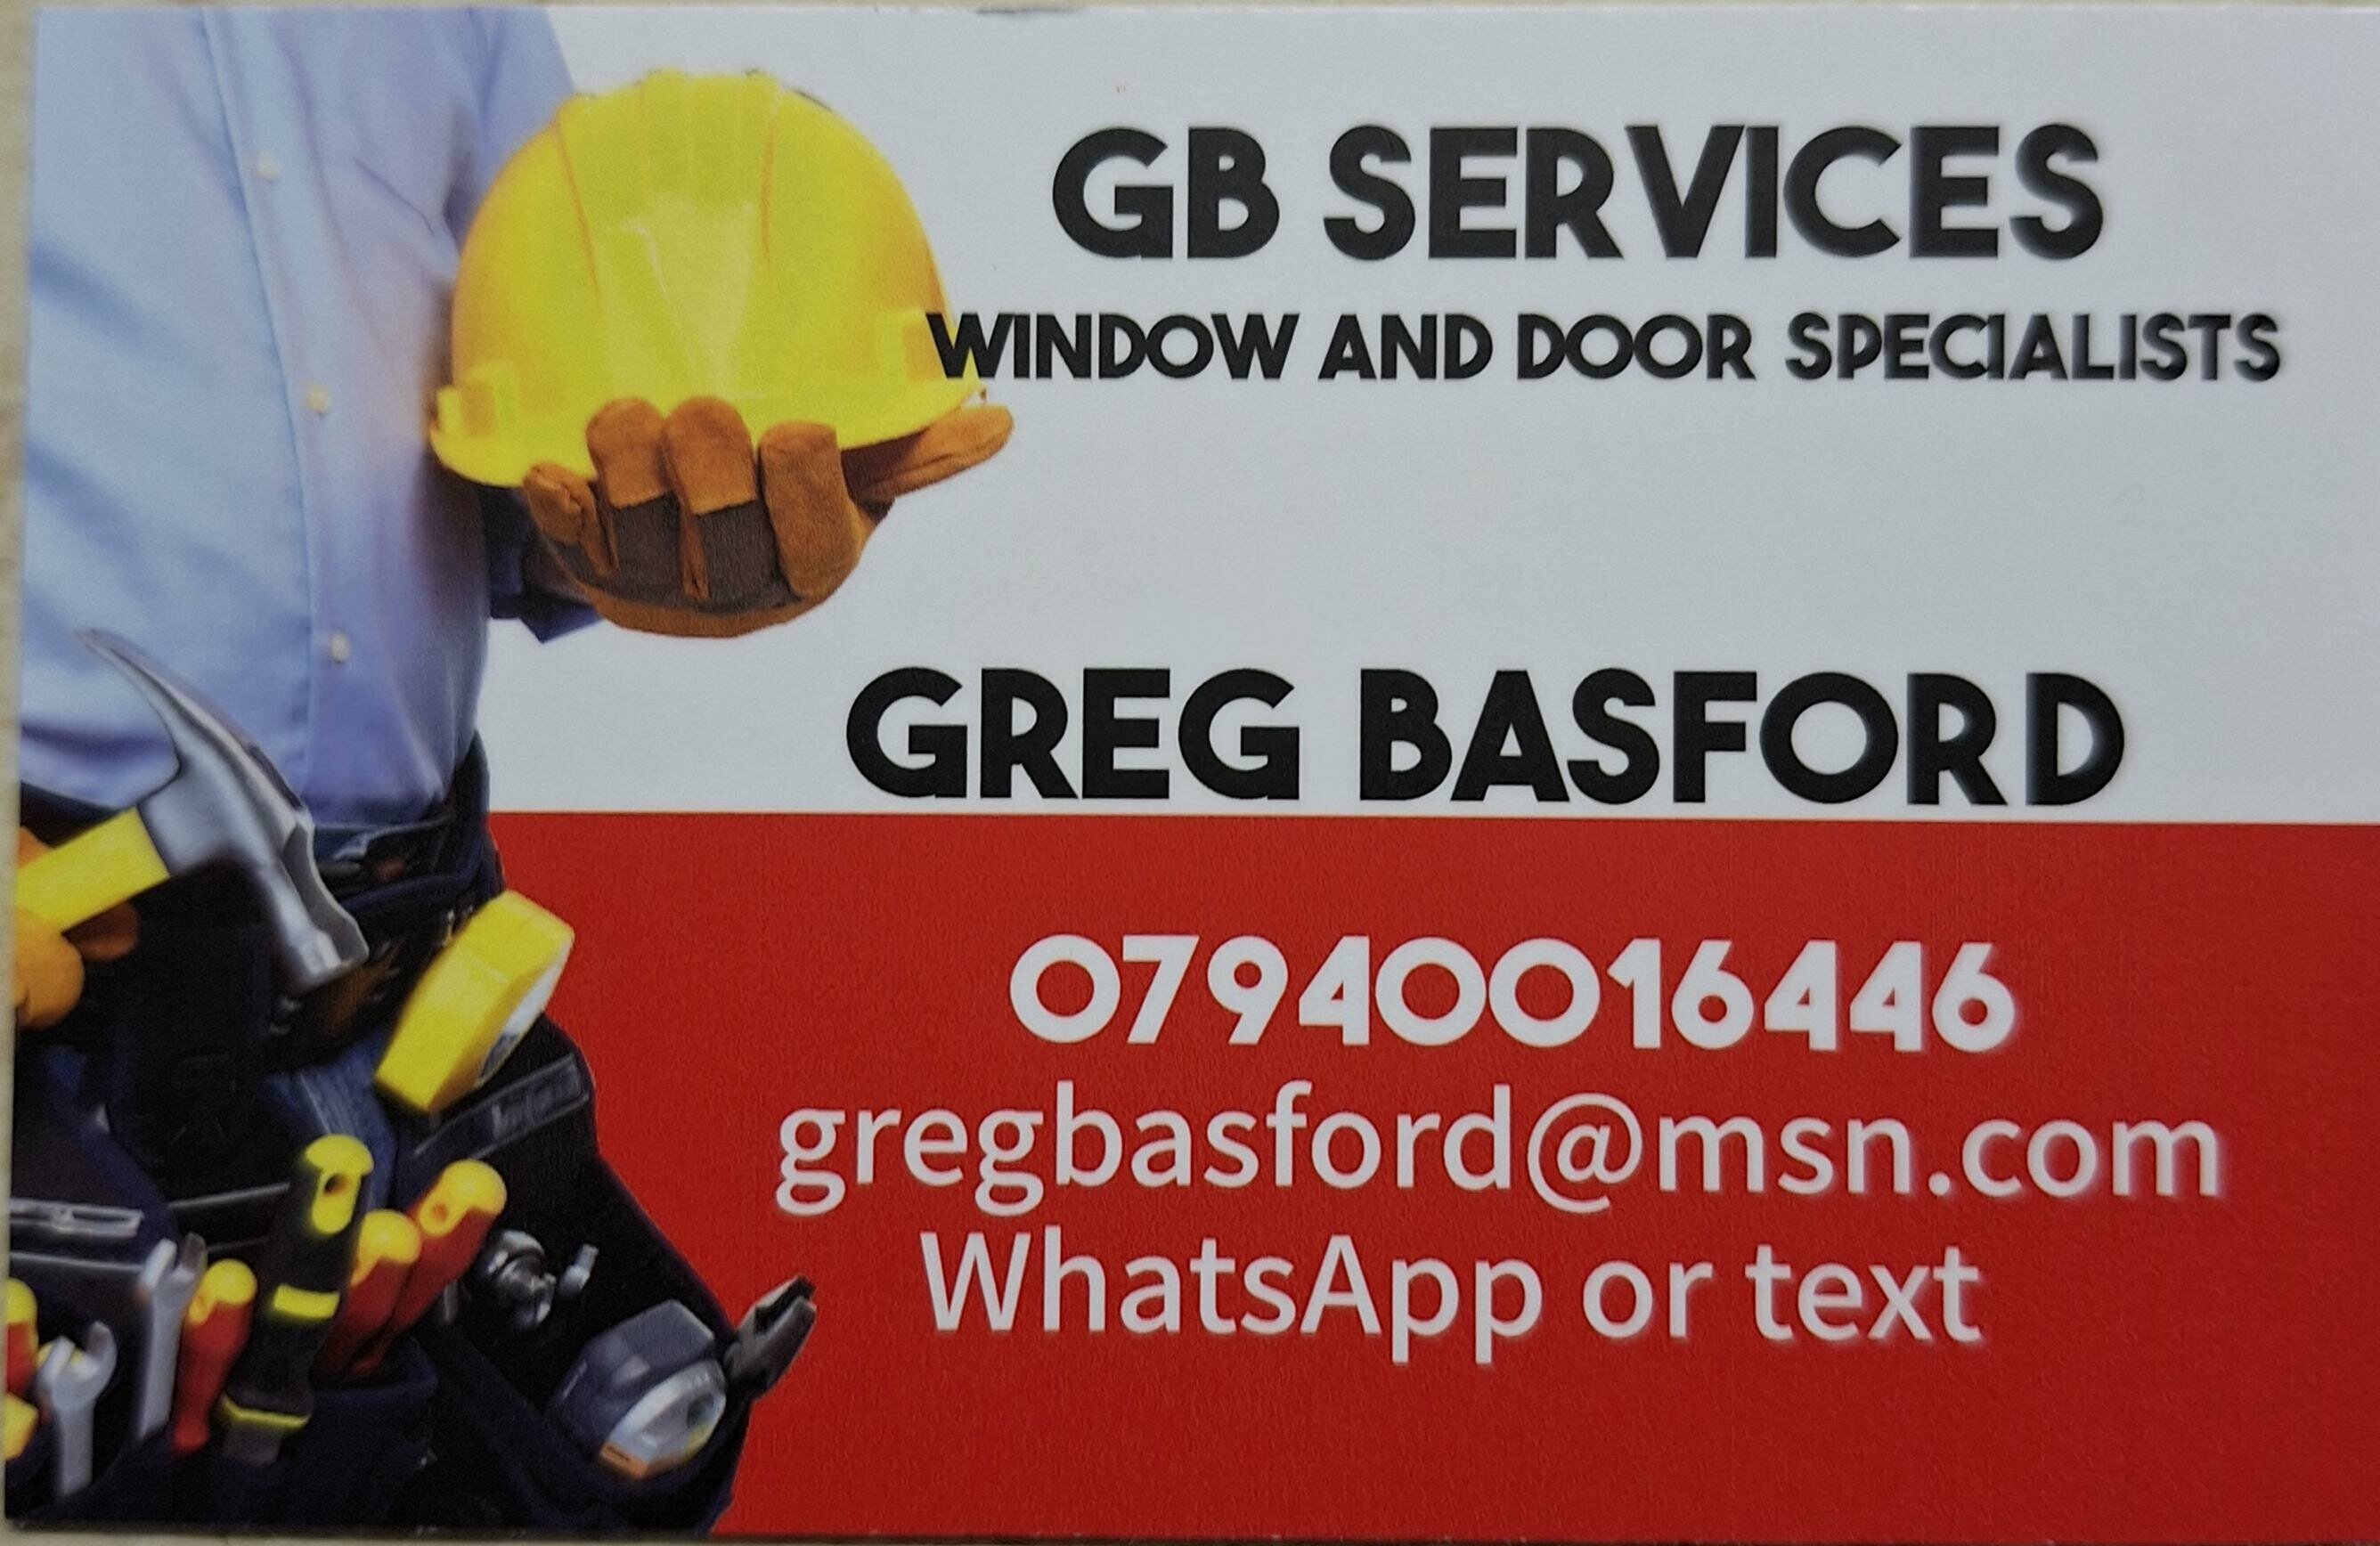 More information about "GB SERVICES - UPVC Service Engineer"